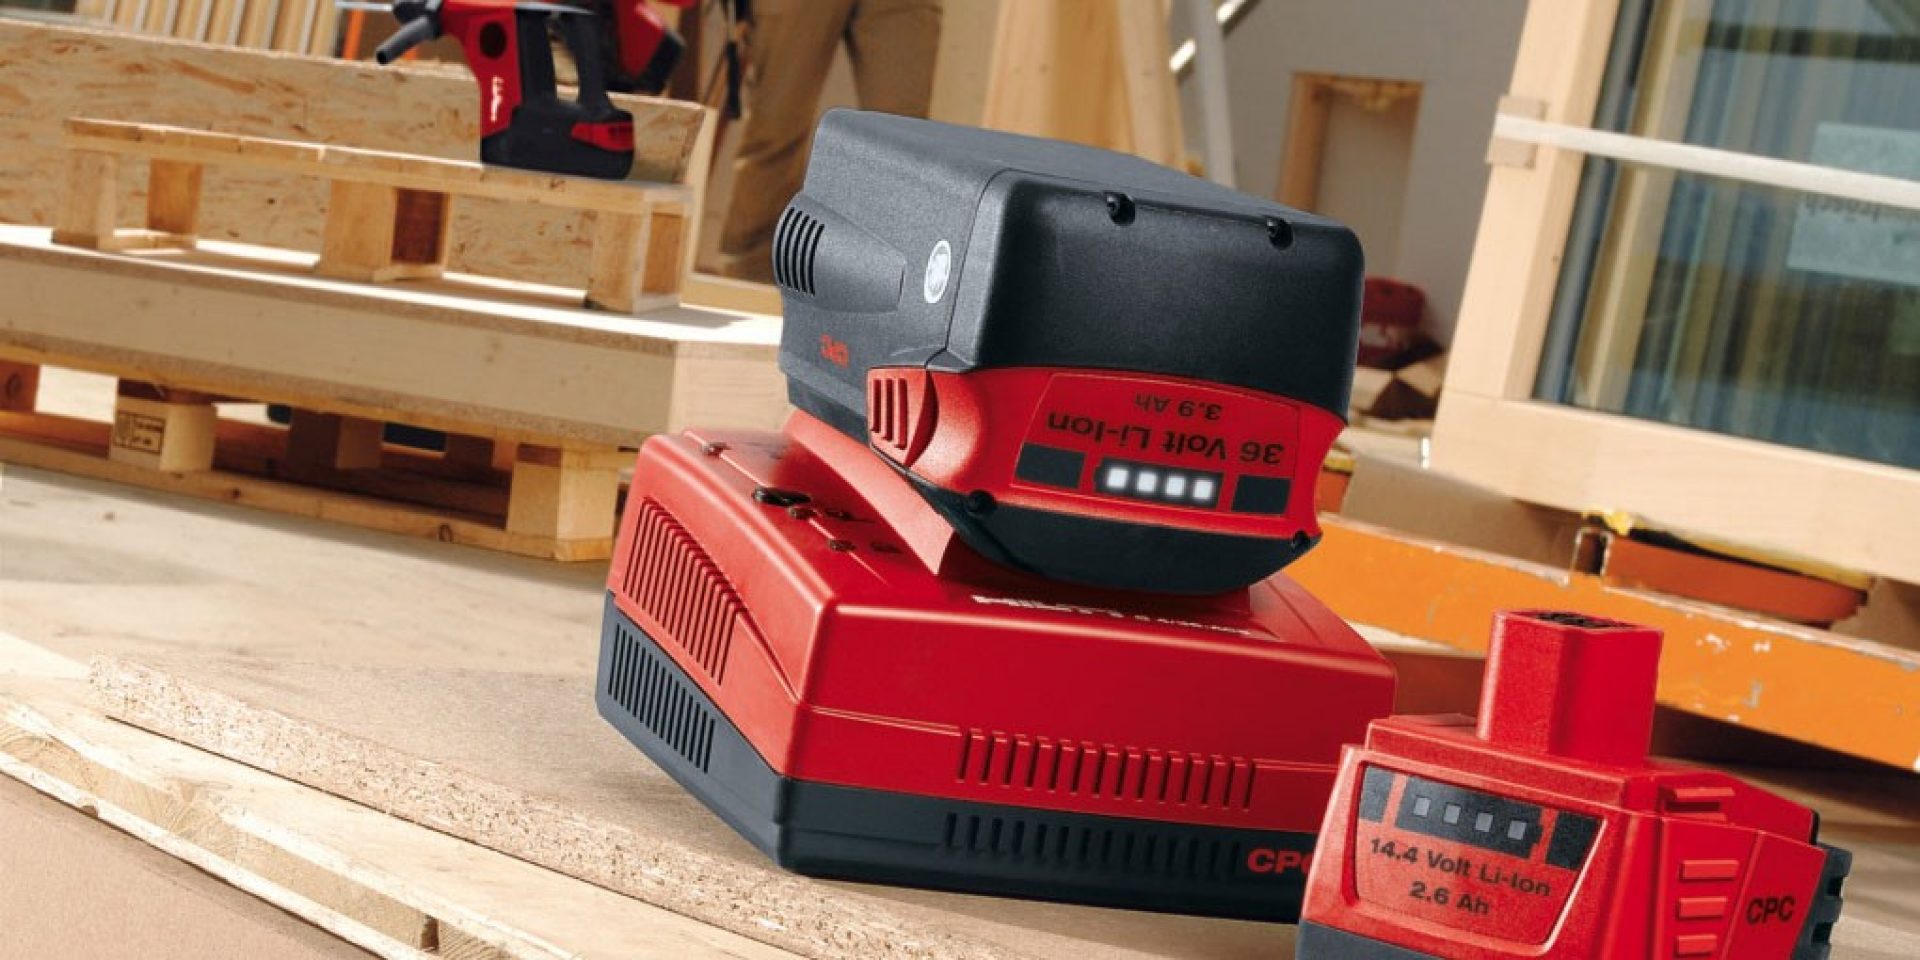 Hilti charger and batteries